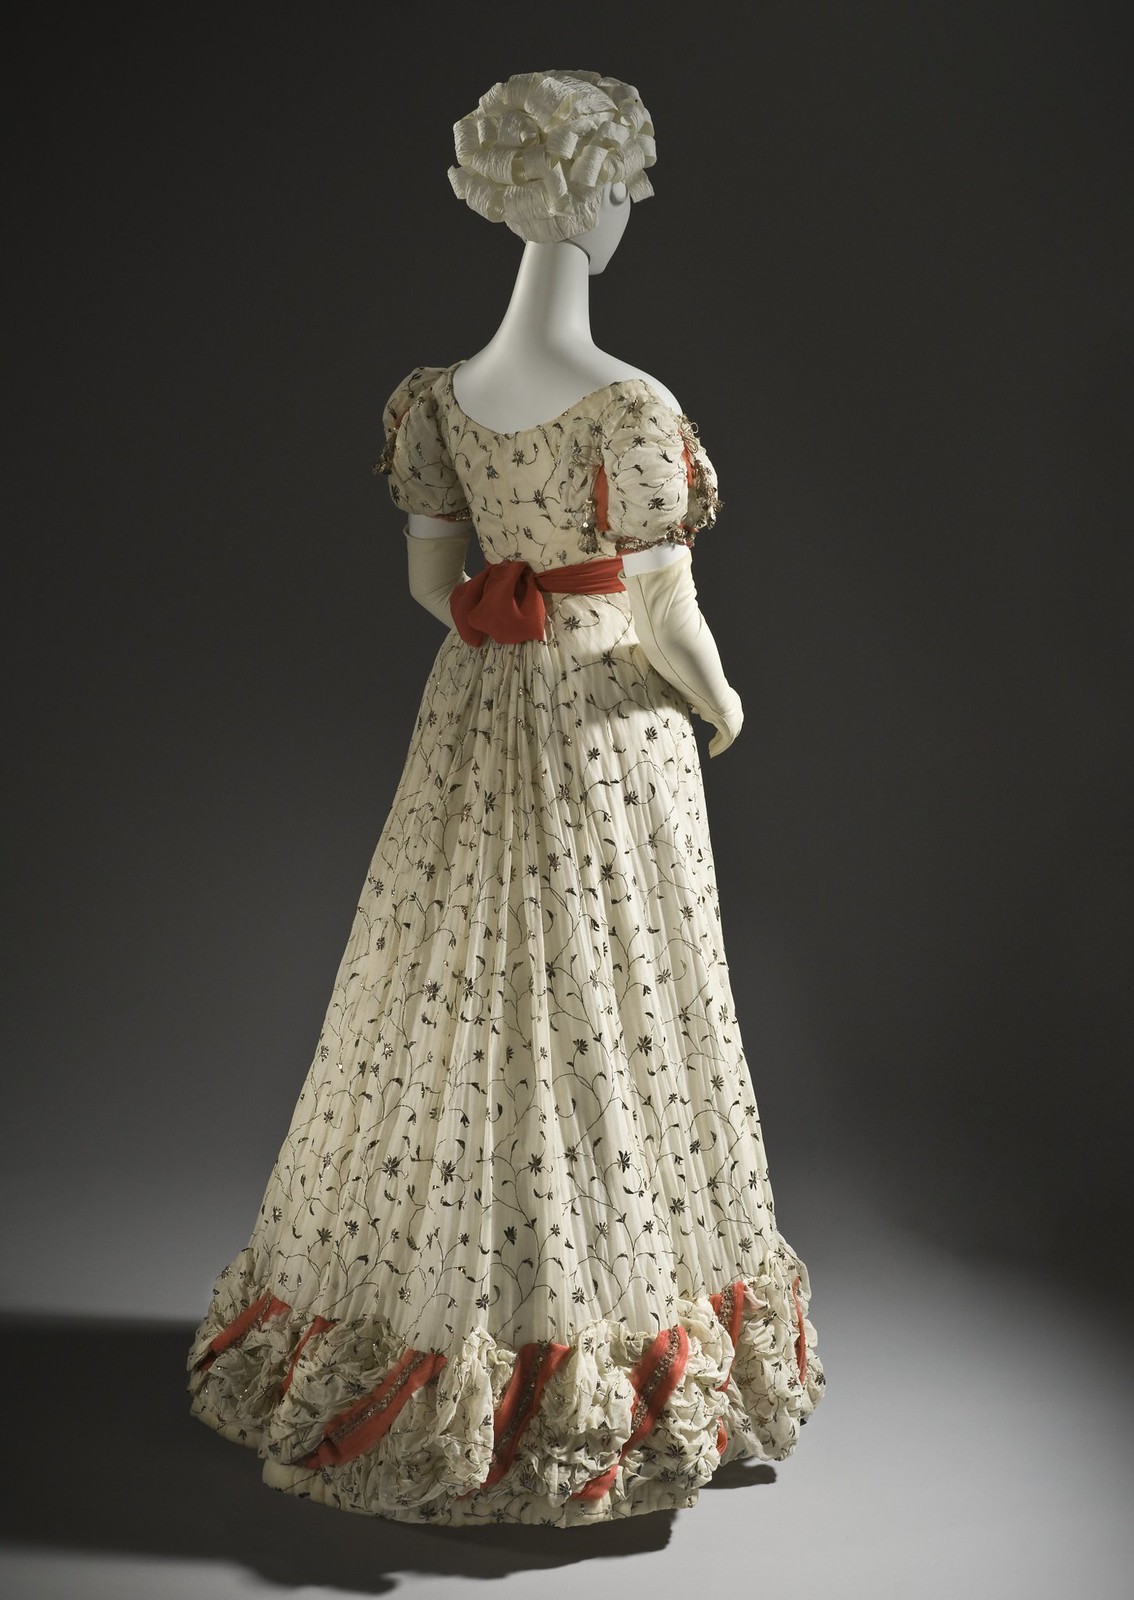 1820 Ball gown. British. Cotton plain weave with metallic thread embroidery and silk ribbons with metallic passementerie and tassels. LACMA